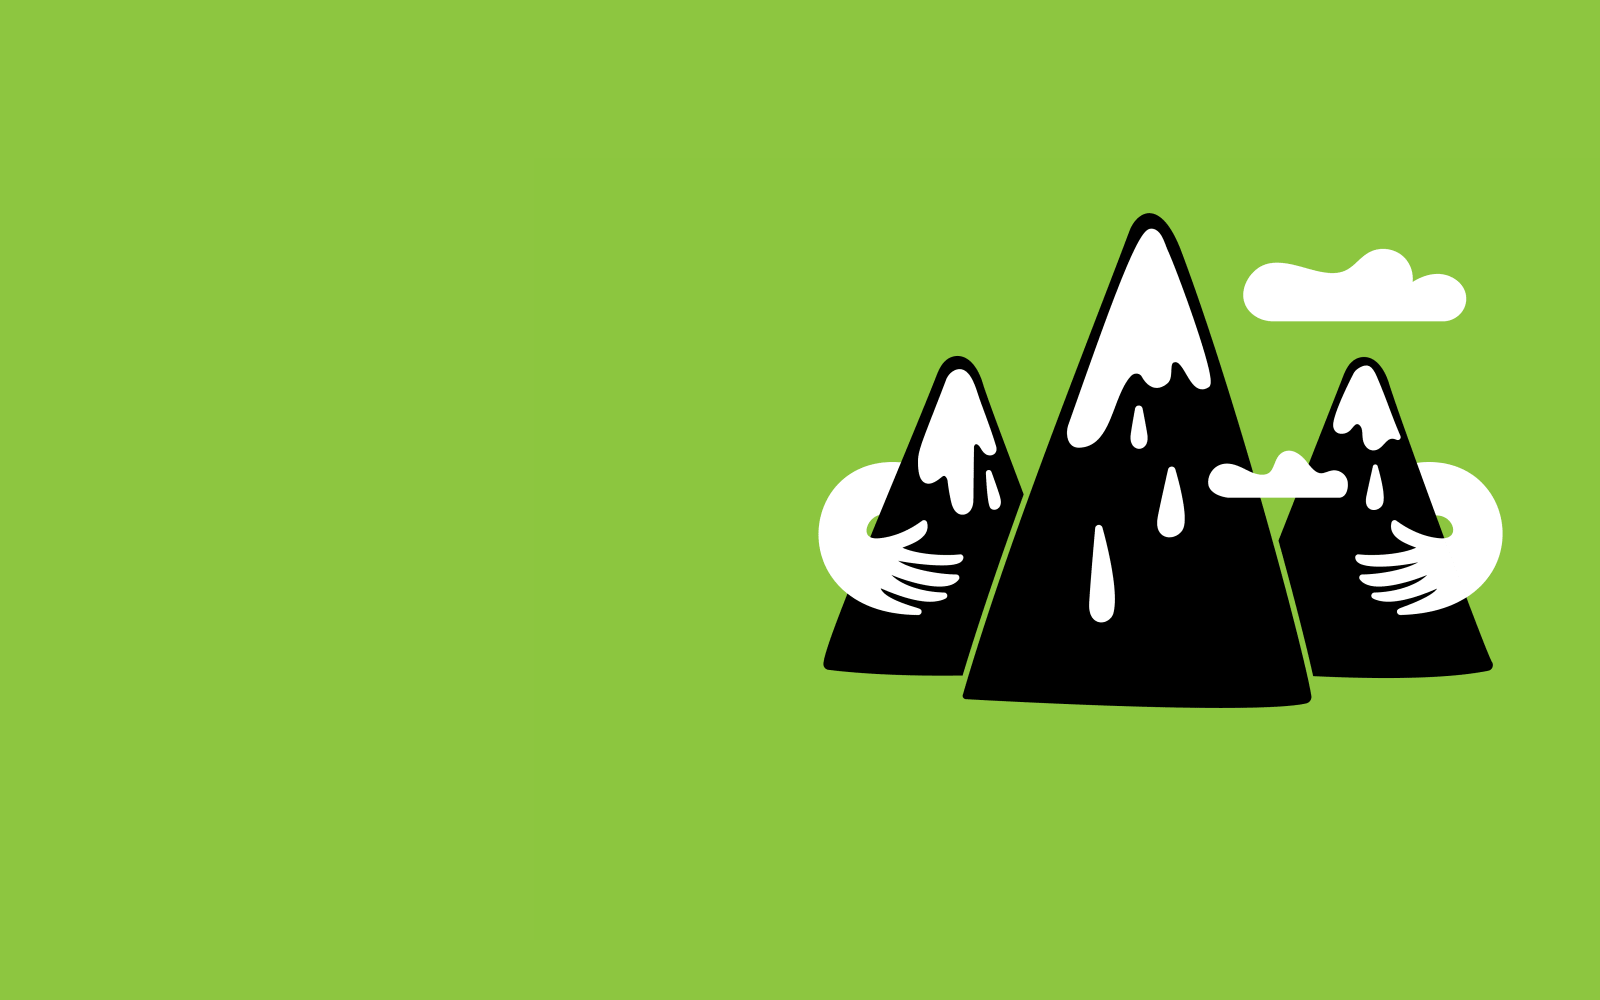 illustrated mountains on green background